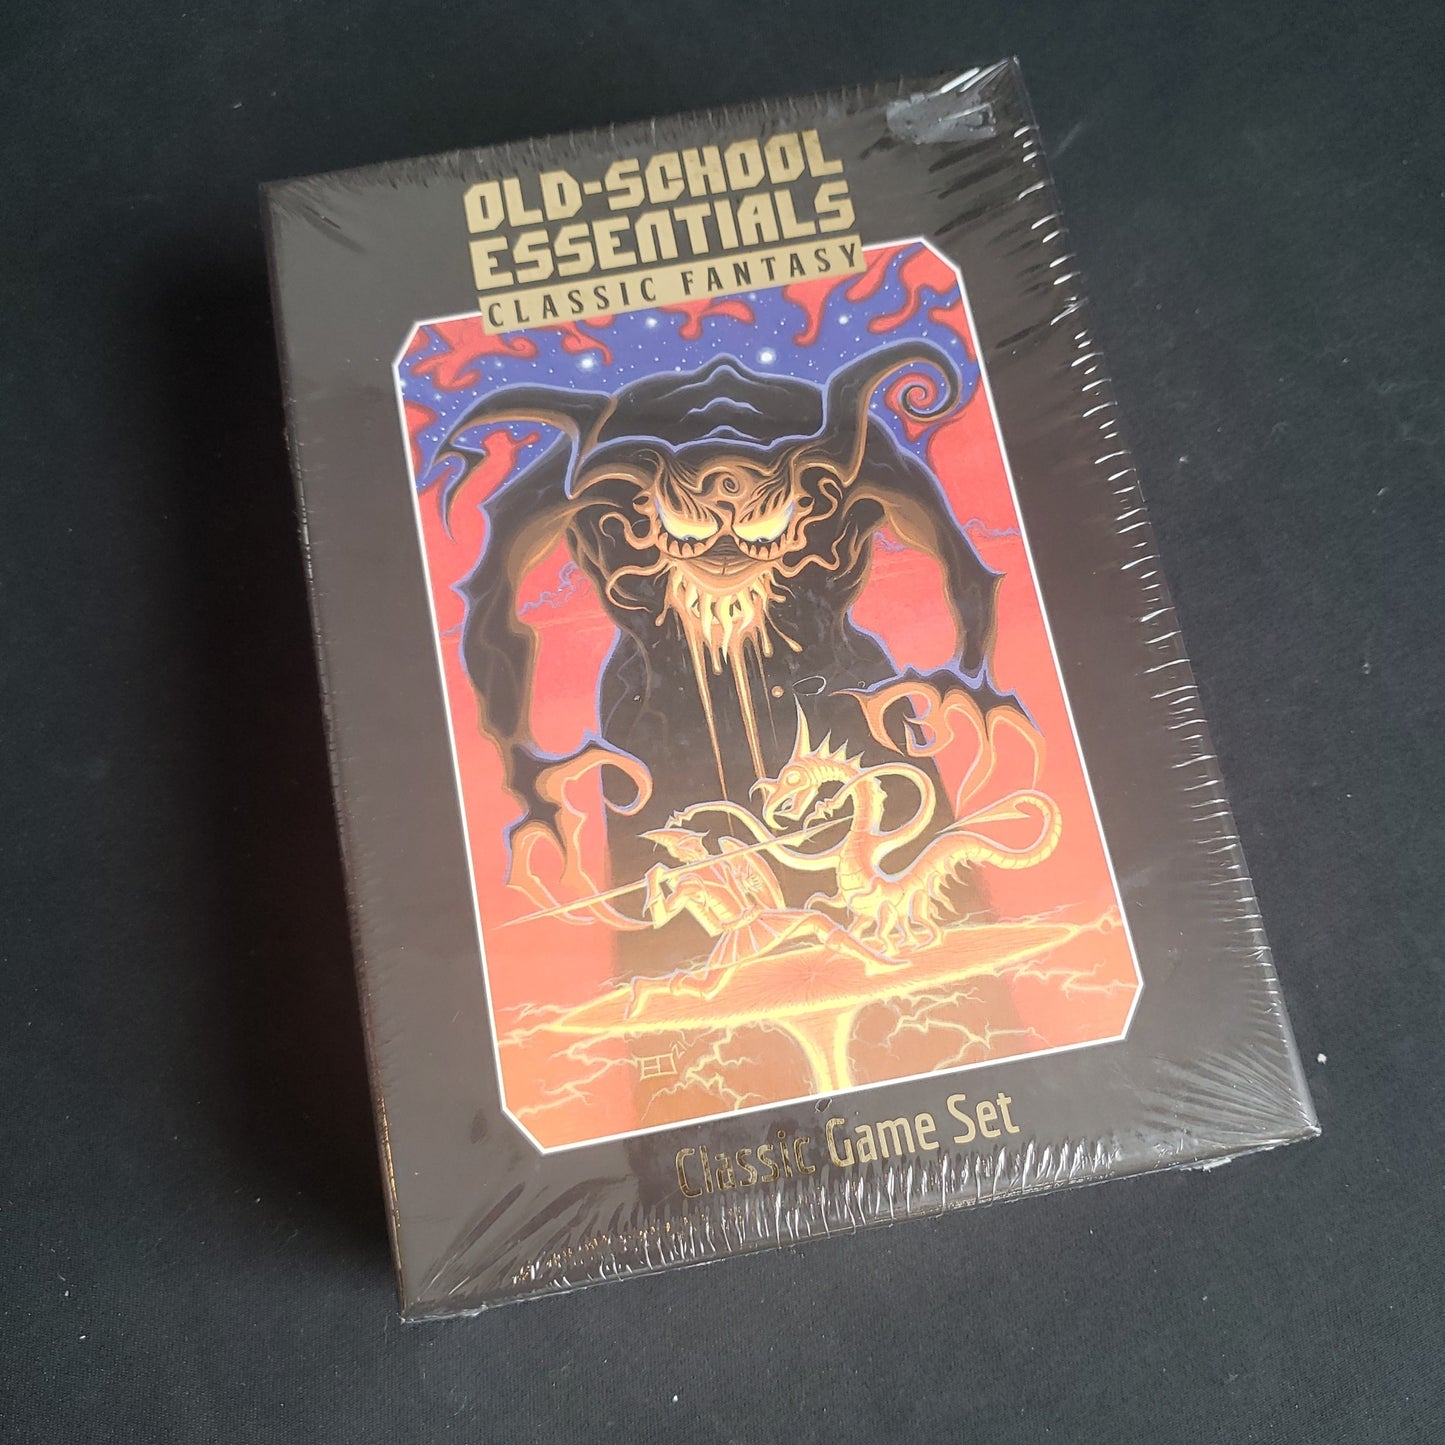 Image shows the front of the box for the Classic Game Set for the Old-School Essentials: Classic Fantasy roleplaying game